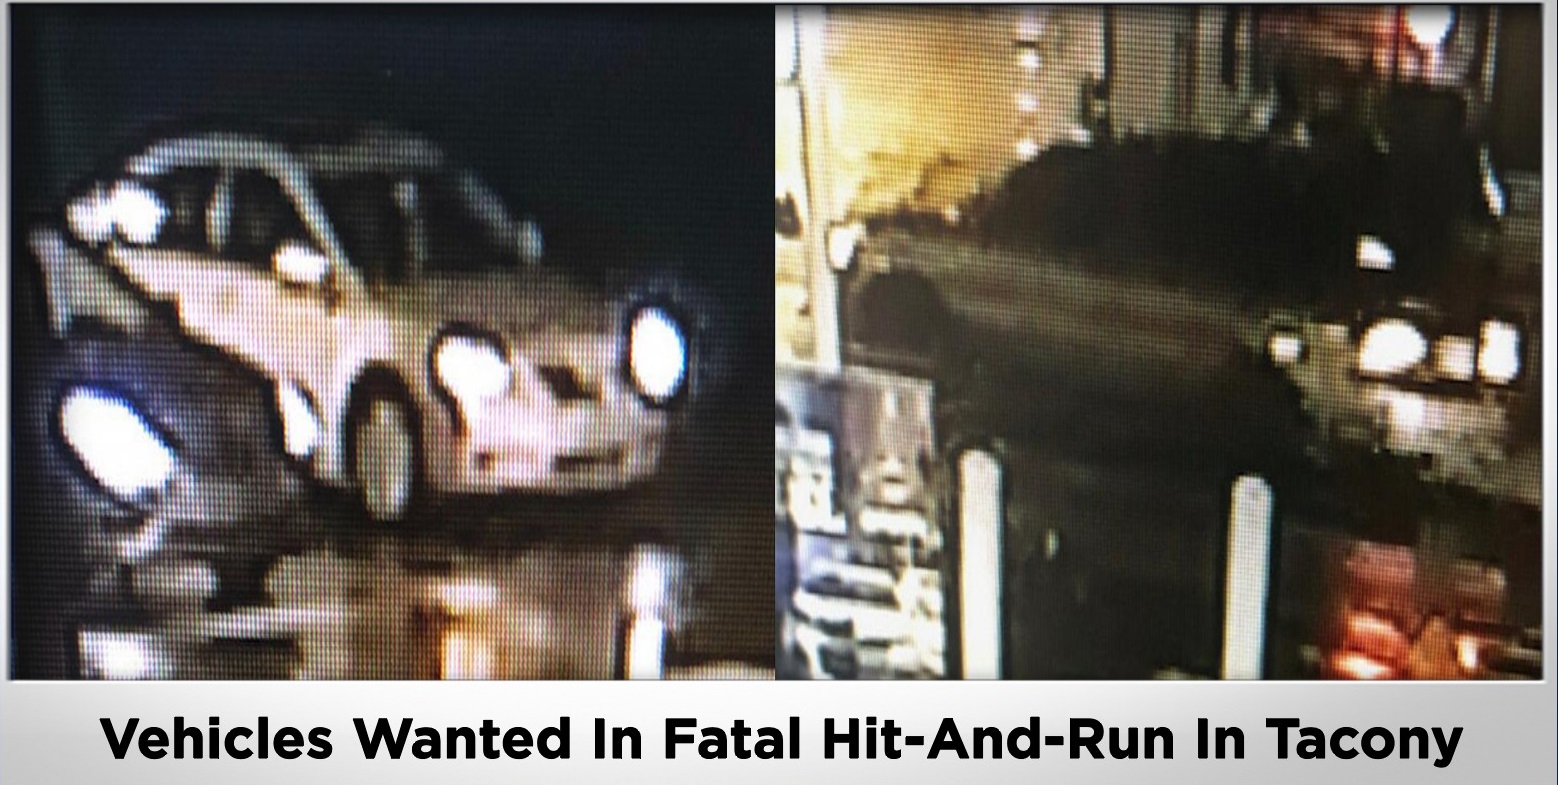 tacony hit and run vehicles 2018 11 10 10 23 34 Police Release Images Of Suspected Vehicles After Man Struck Twice, Killed In Hit And Run In Tacony